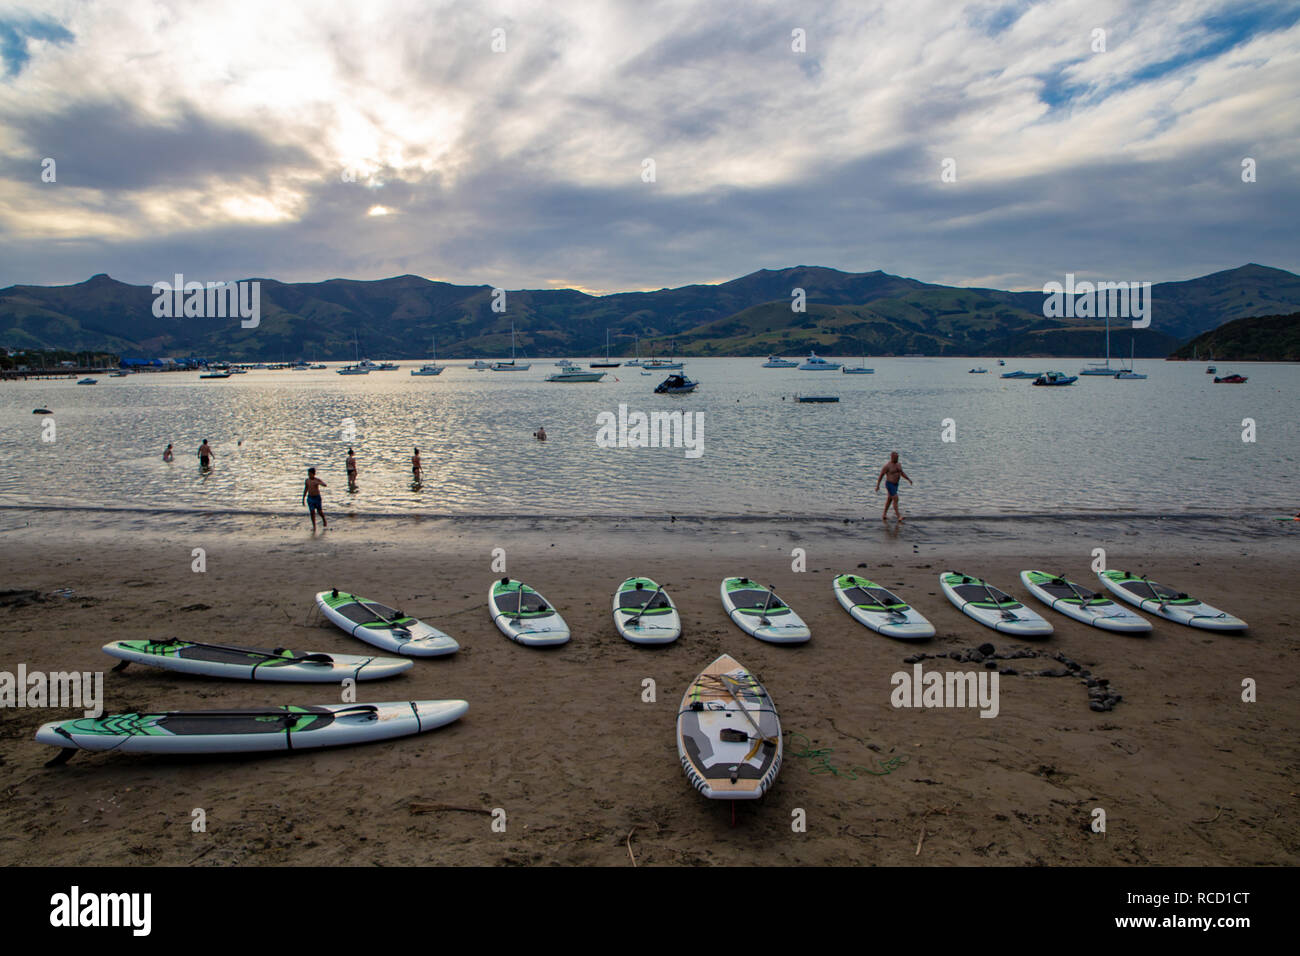 Akaroa, Canterbury, New Zealand - January 5 2019: paddleboards on the beach at Akaroa ready to be hired by tourists on a hot summer evening Stock Photo